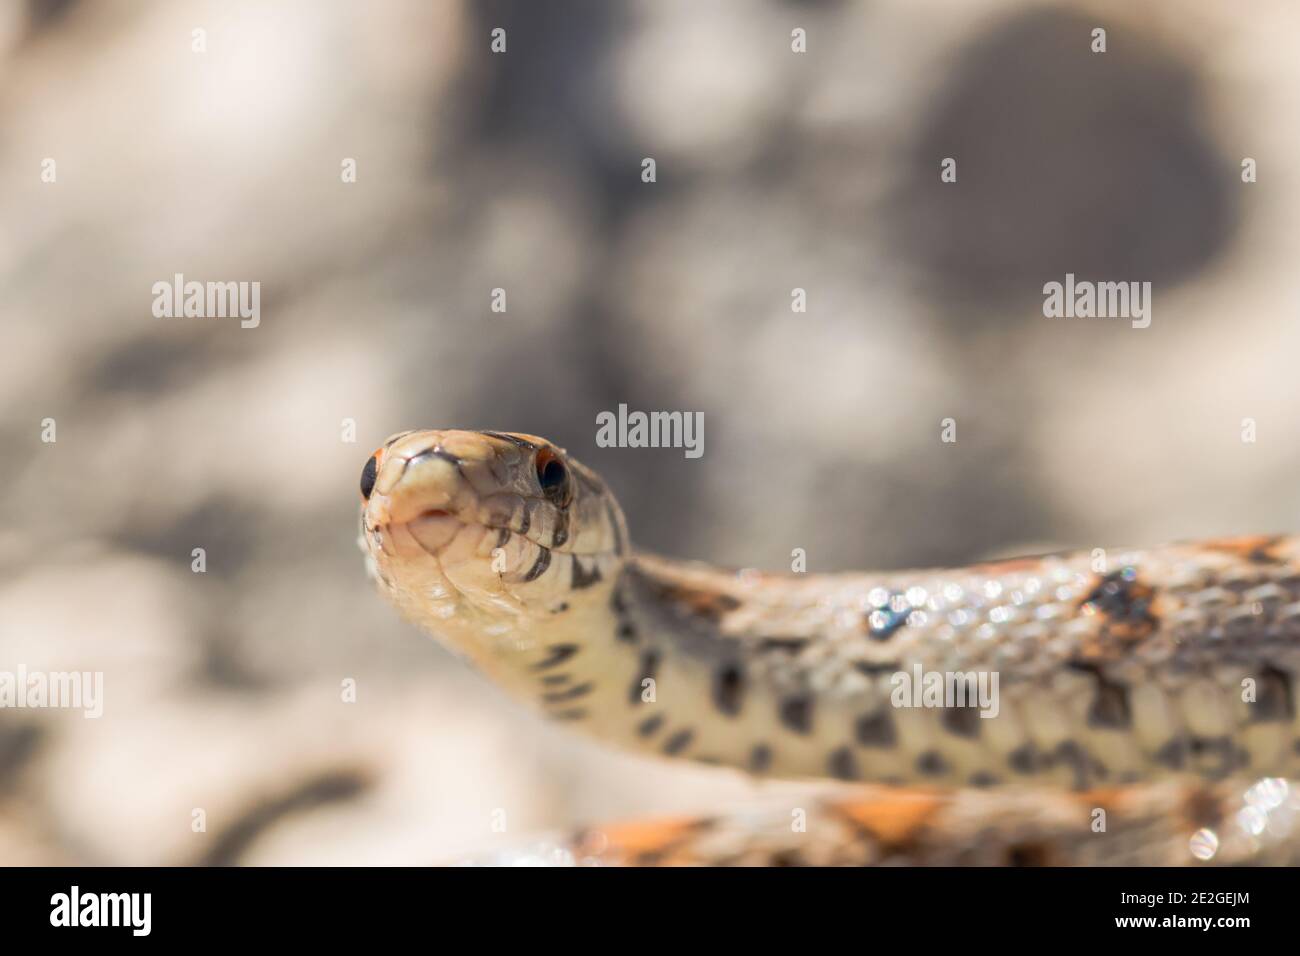 Close up of head of an adult Leopard Snake or European Ratsnake, Zamenis situla, in Malta Stock Photo